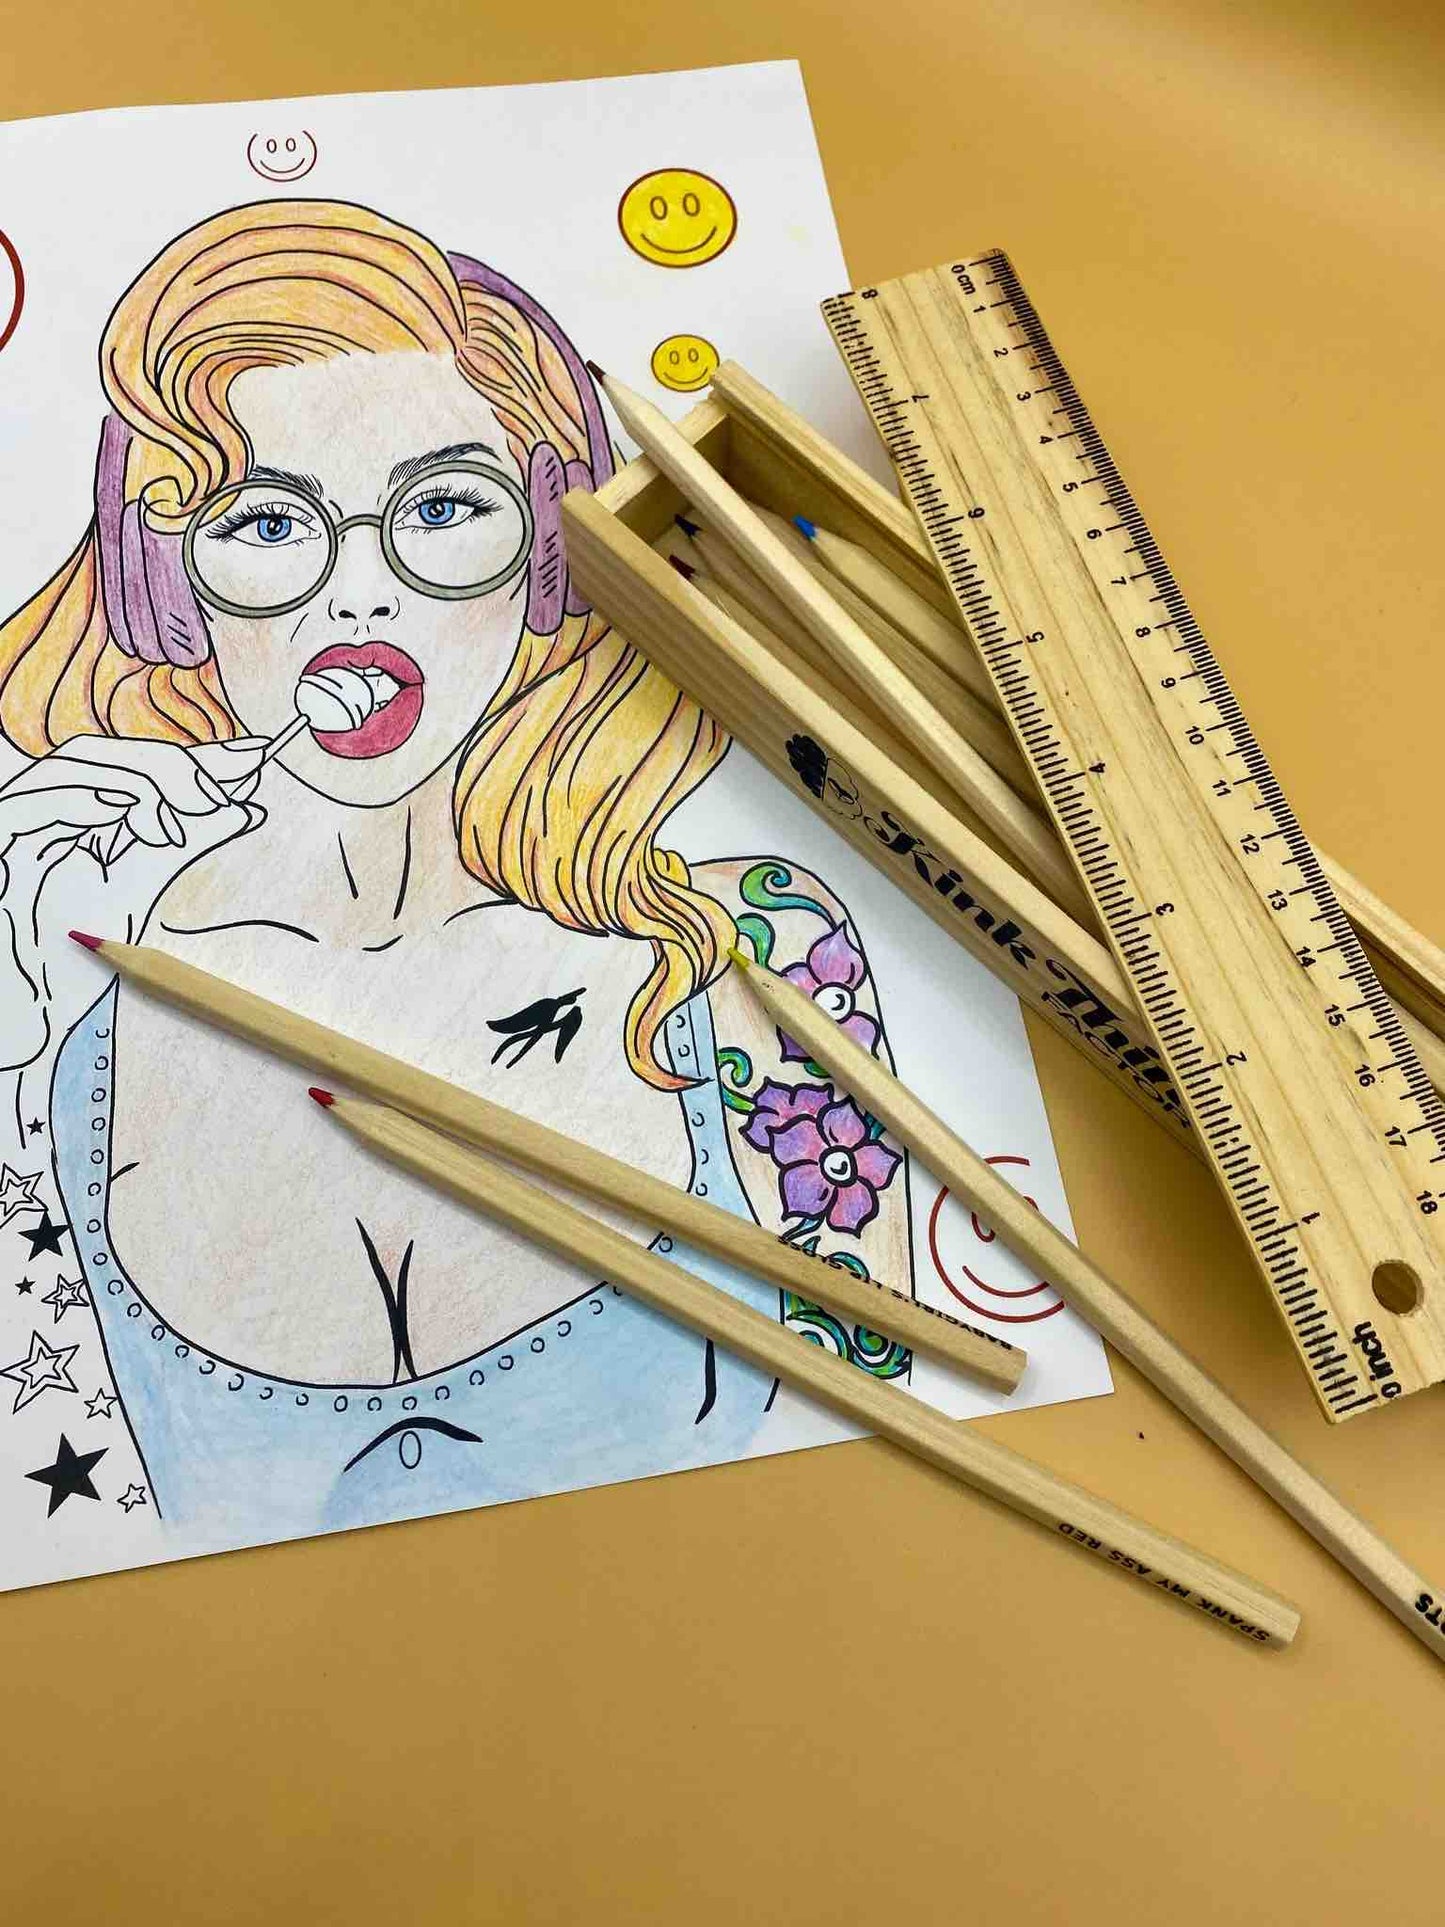 A page from Naughty and Nice: A Coloring Book for Babygirls: A half colored illustration of girl in a low cut top with a lollipop in her mouth.  Sitting atop the right side of the page is a box of colored pencils and a ruler.